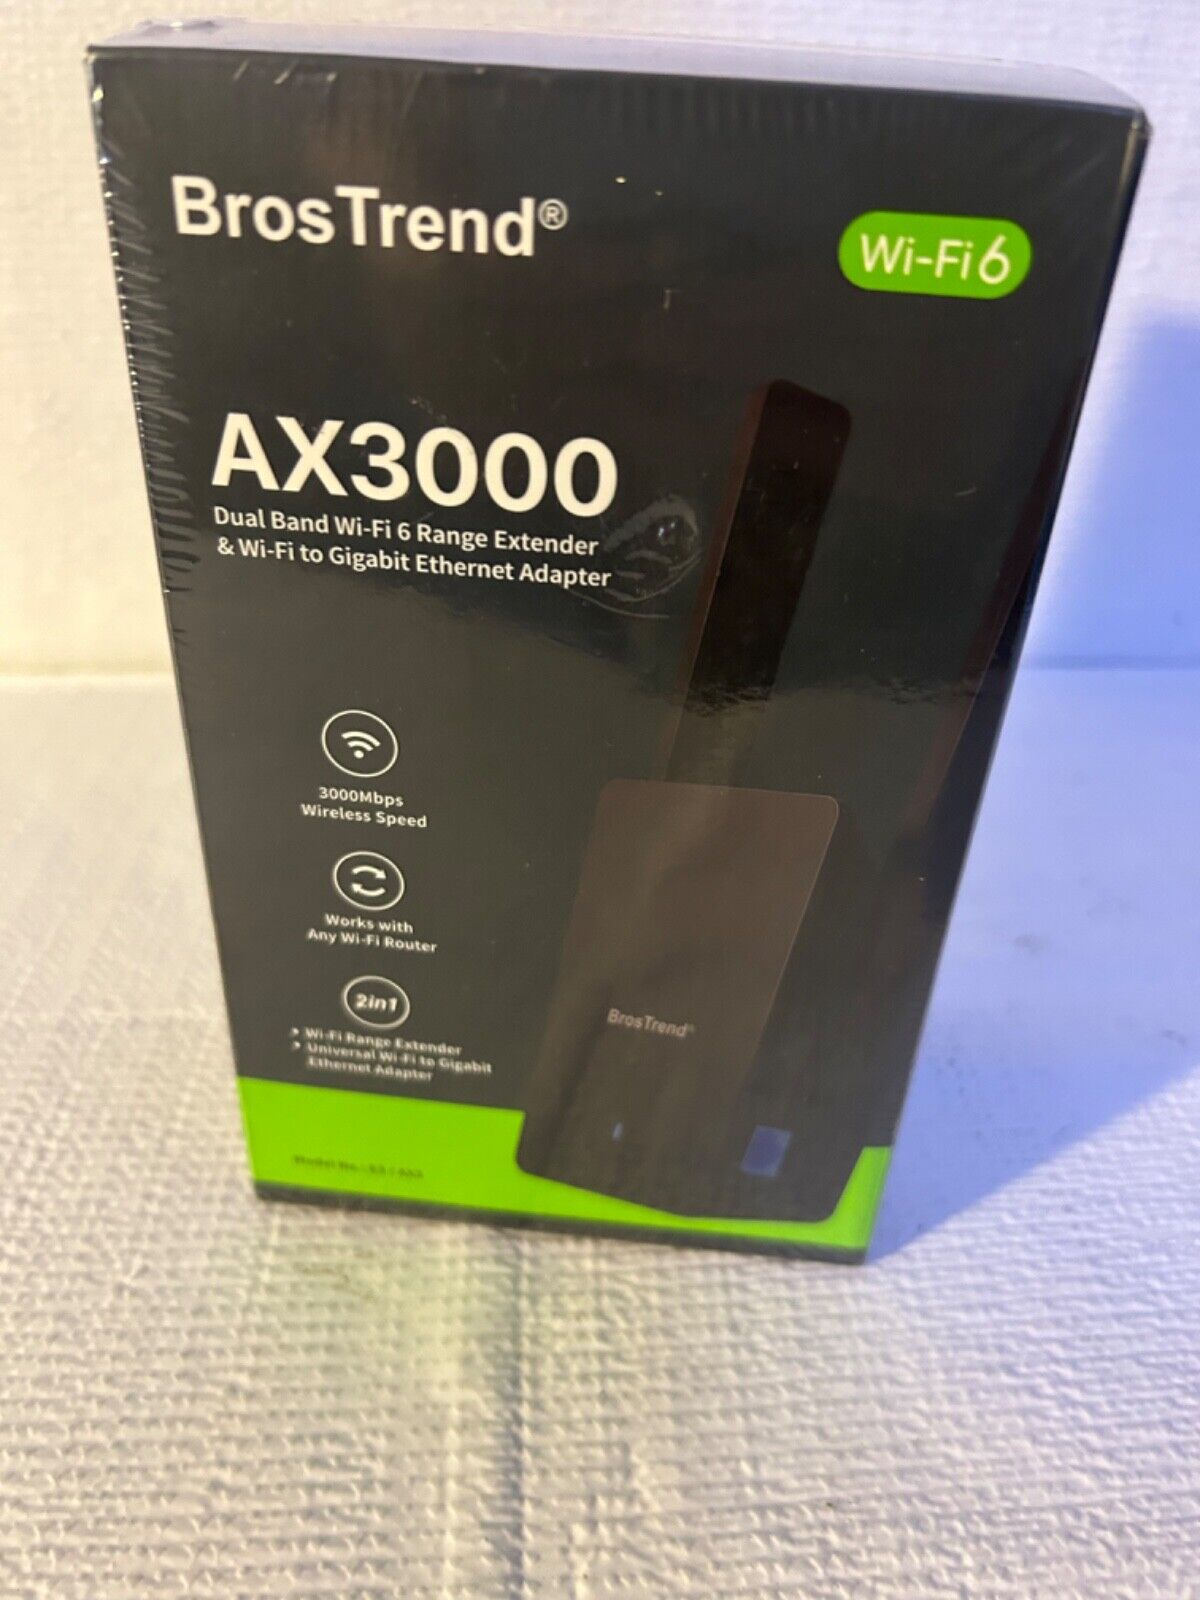 Gaming Wi-Fi 6 Access Pont Bros Trend AX3000 - 3000Mbps Speeds-